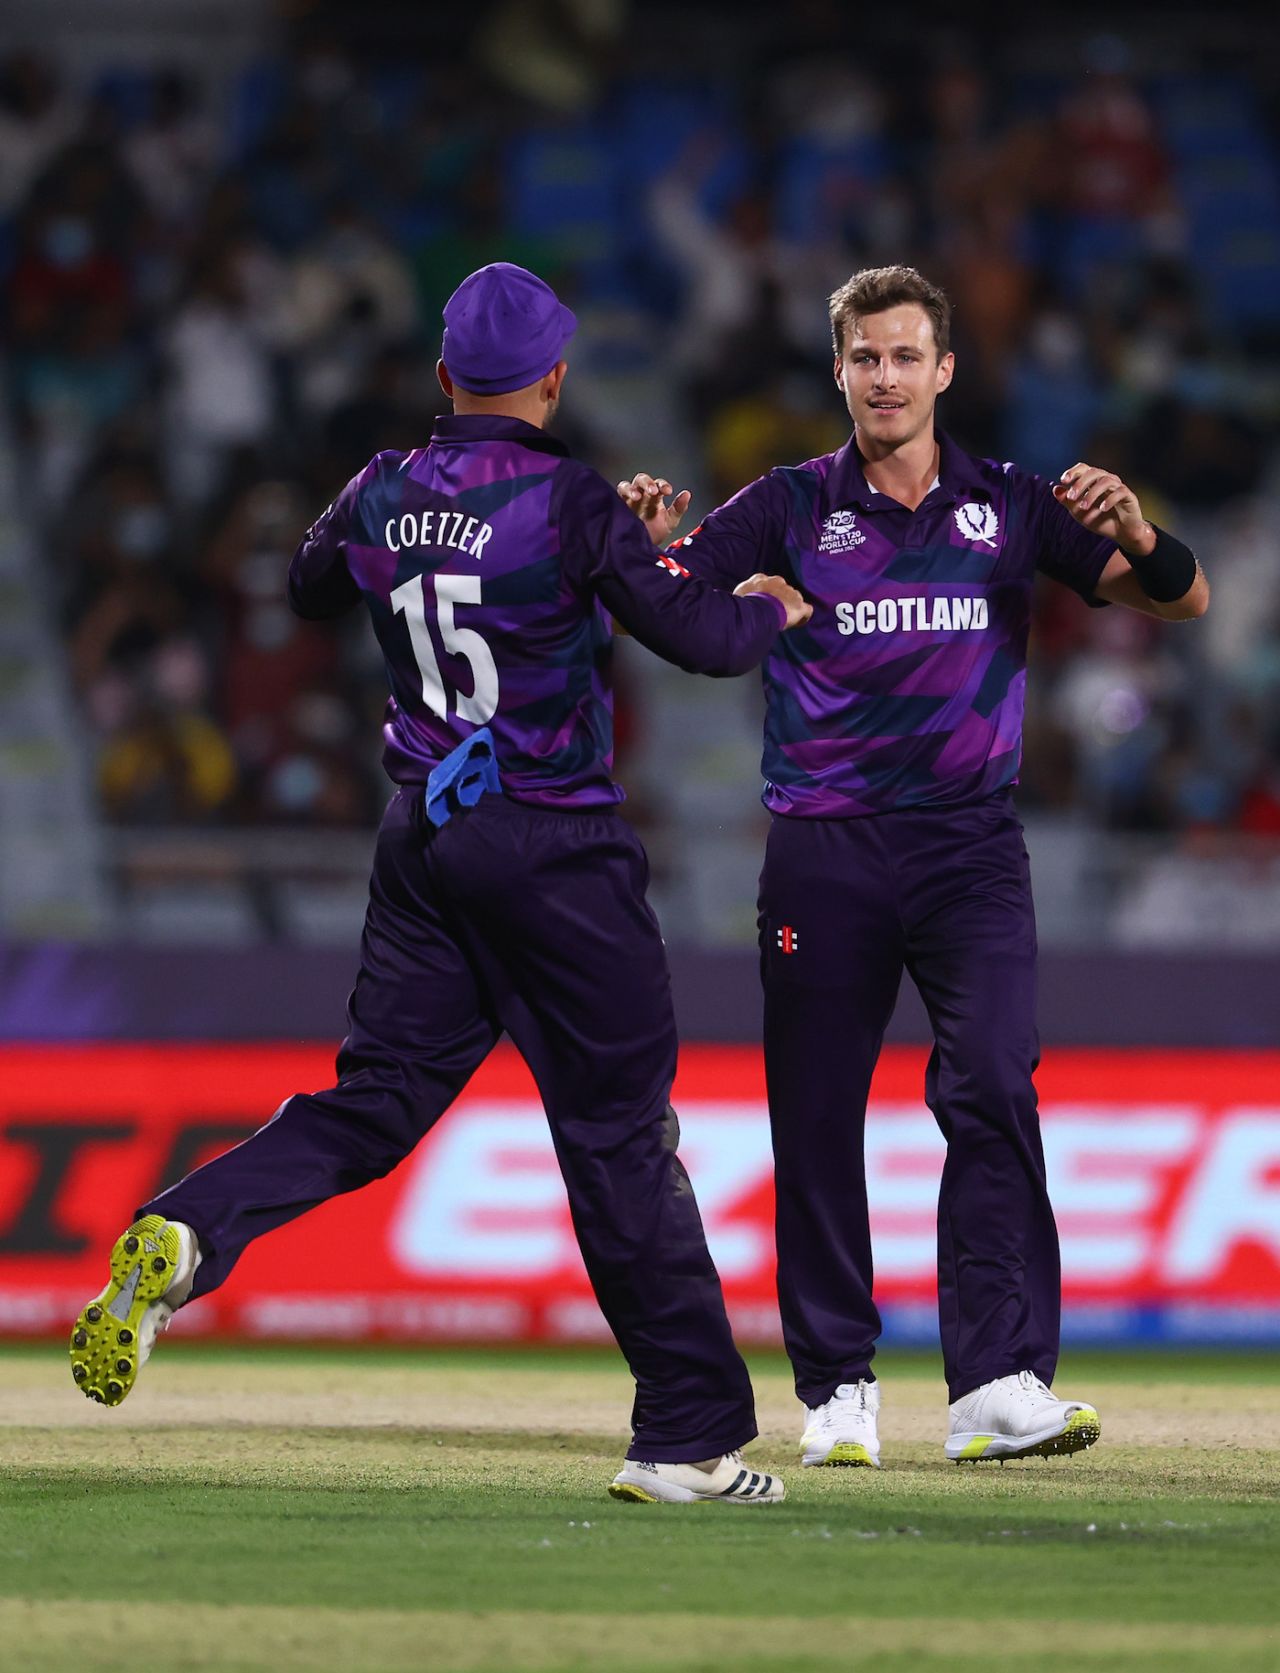 Brad Wheal celebrates a wicket with Kyle Coetzer, Bangladesh vs Scotland, T20 World Cup, Muscat, October 17, 2021